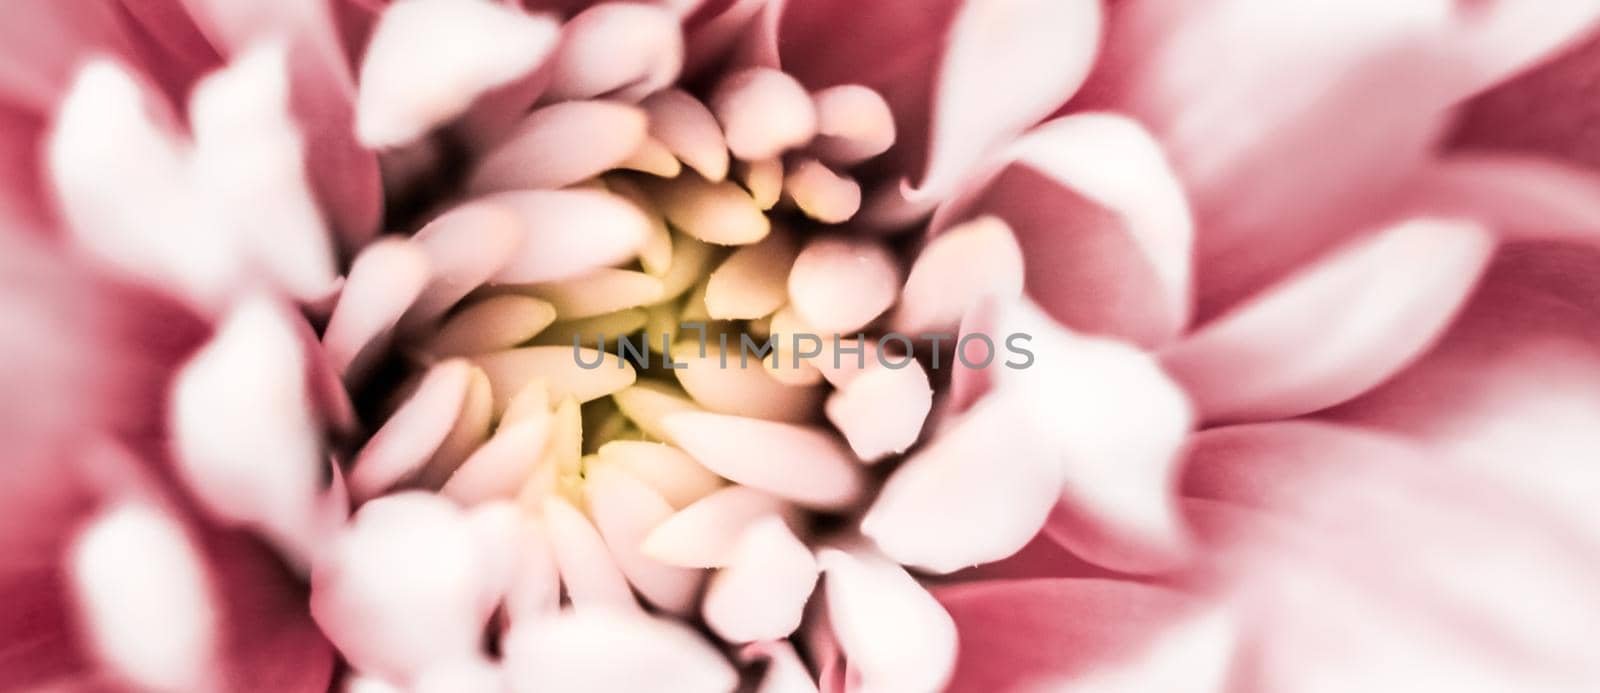 Flora, branding and love concept - Pink daisy flower petals in bloom, abstract floral blossom art background, flowers in spring nature for perfume scent, wedding, luxury beauty brand holiday design